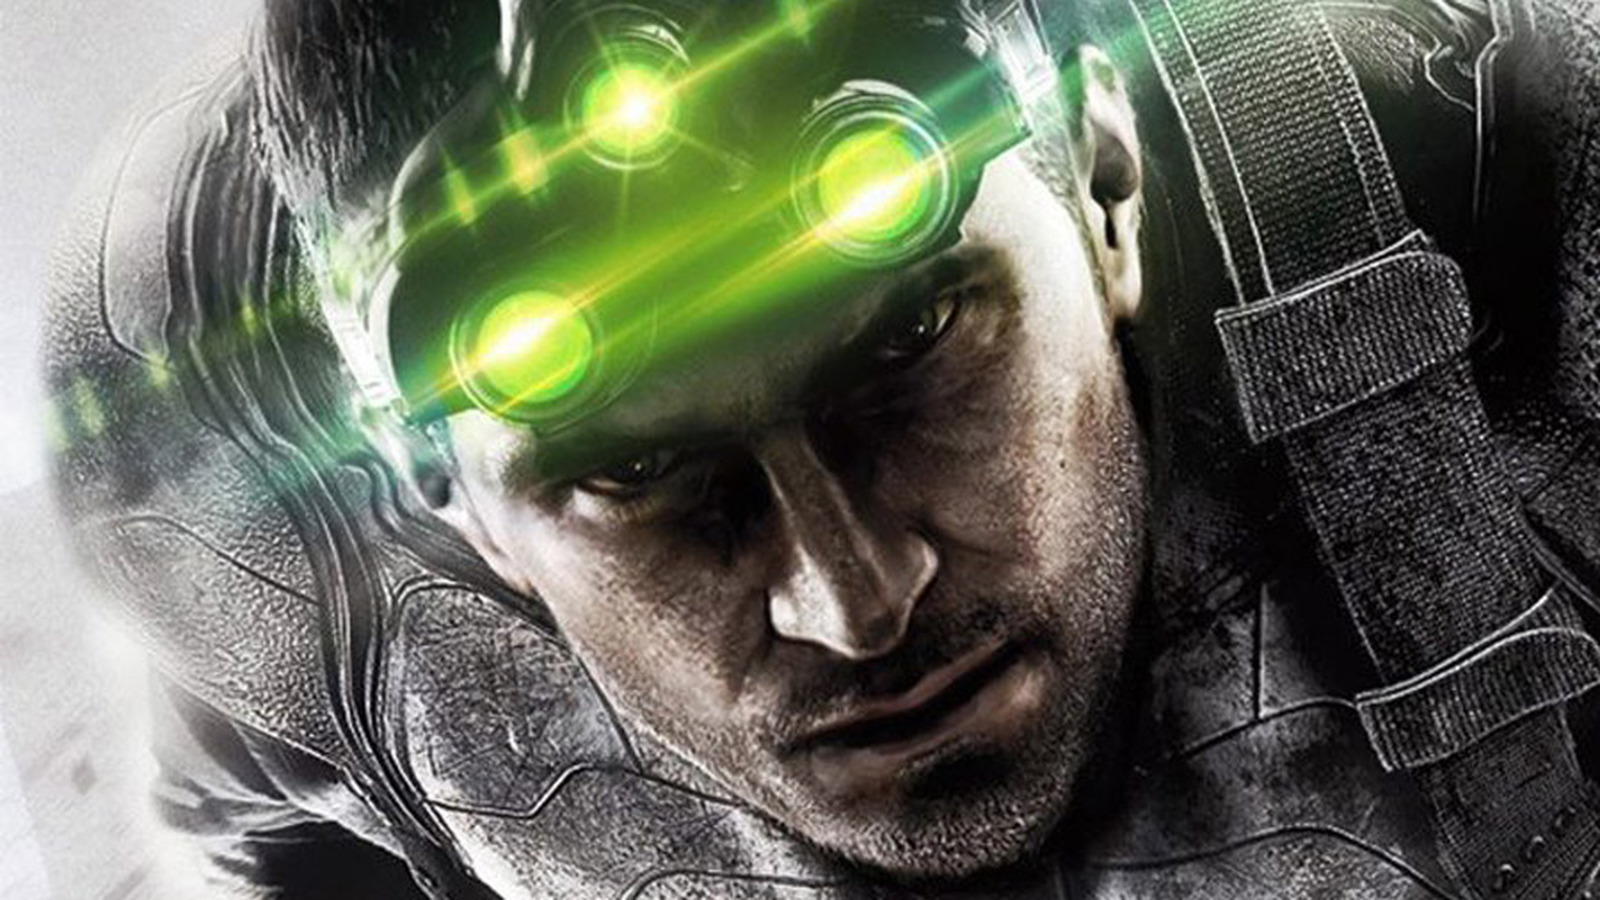 Survey Reveals How Many People Want Splinter Cell To Make A Comeback